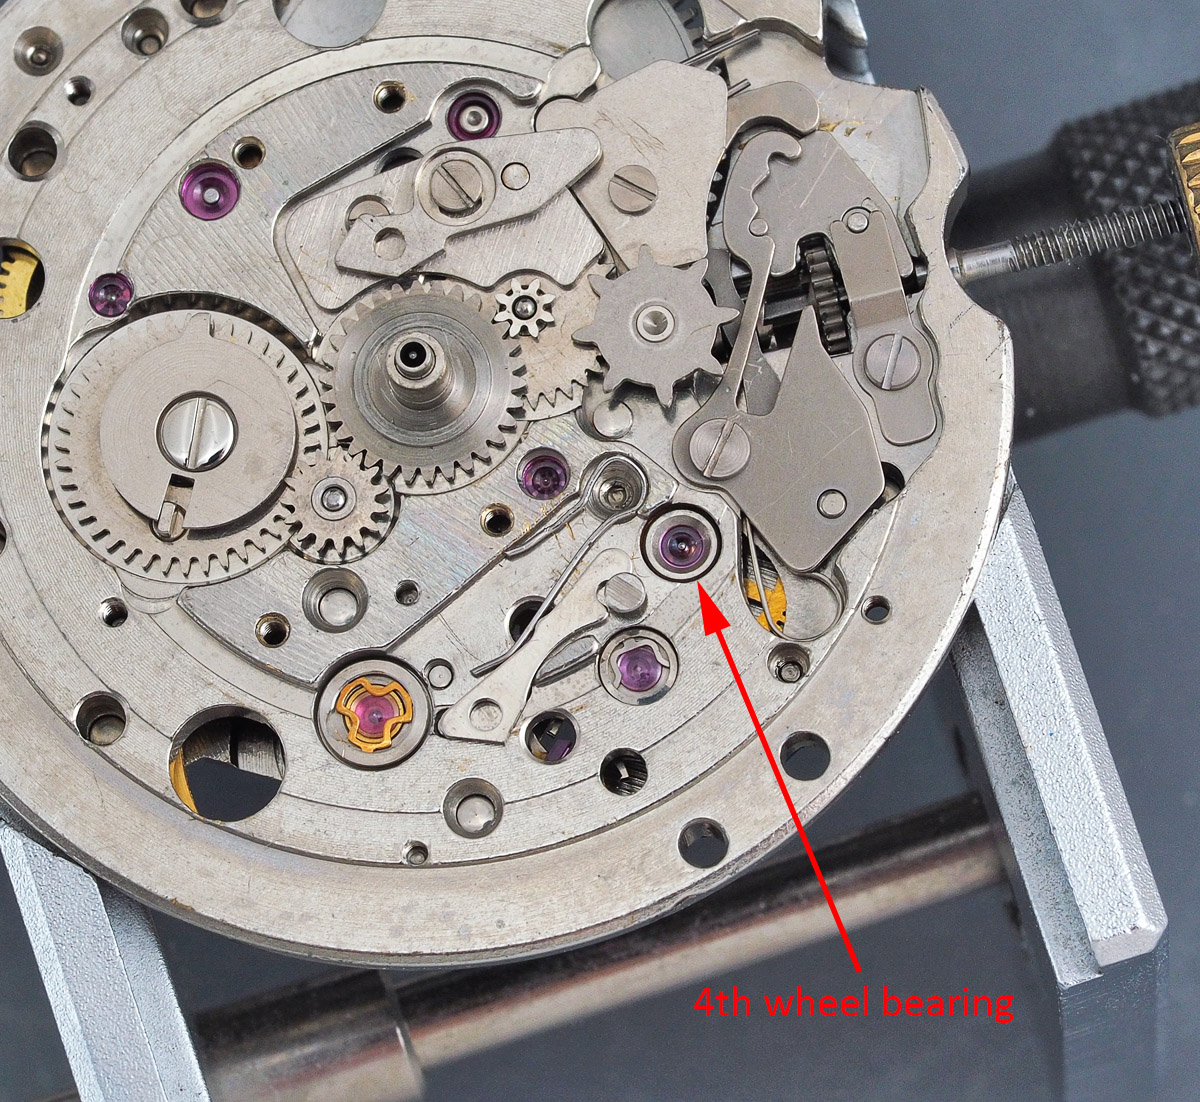 Splitting a pair of eights: Seikomatic-R/Business-A 8346-9000 Part 1 |  Adventures in Amateur Watch Fettling